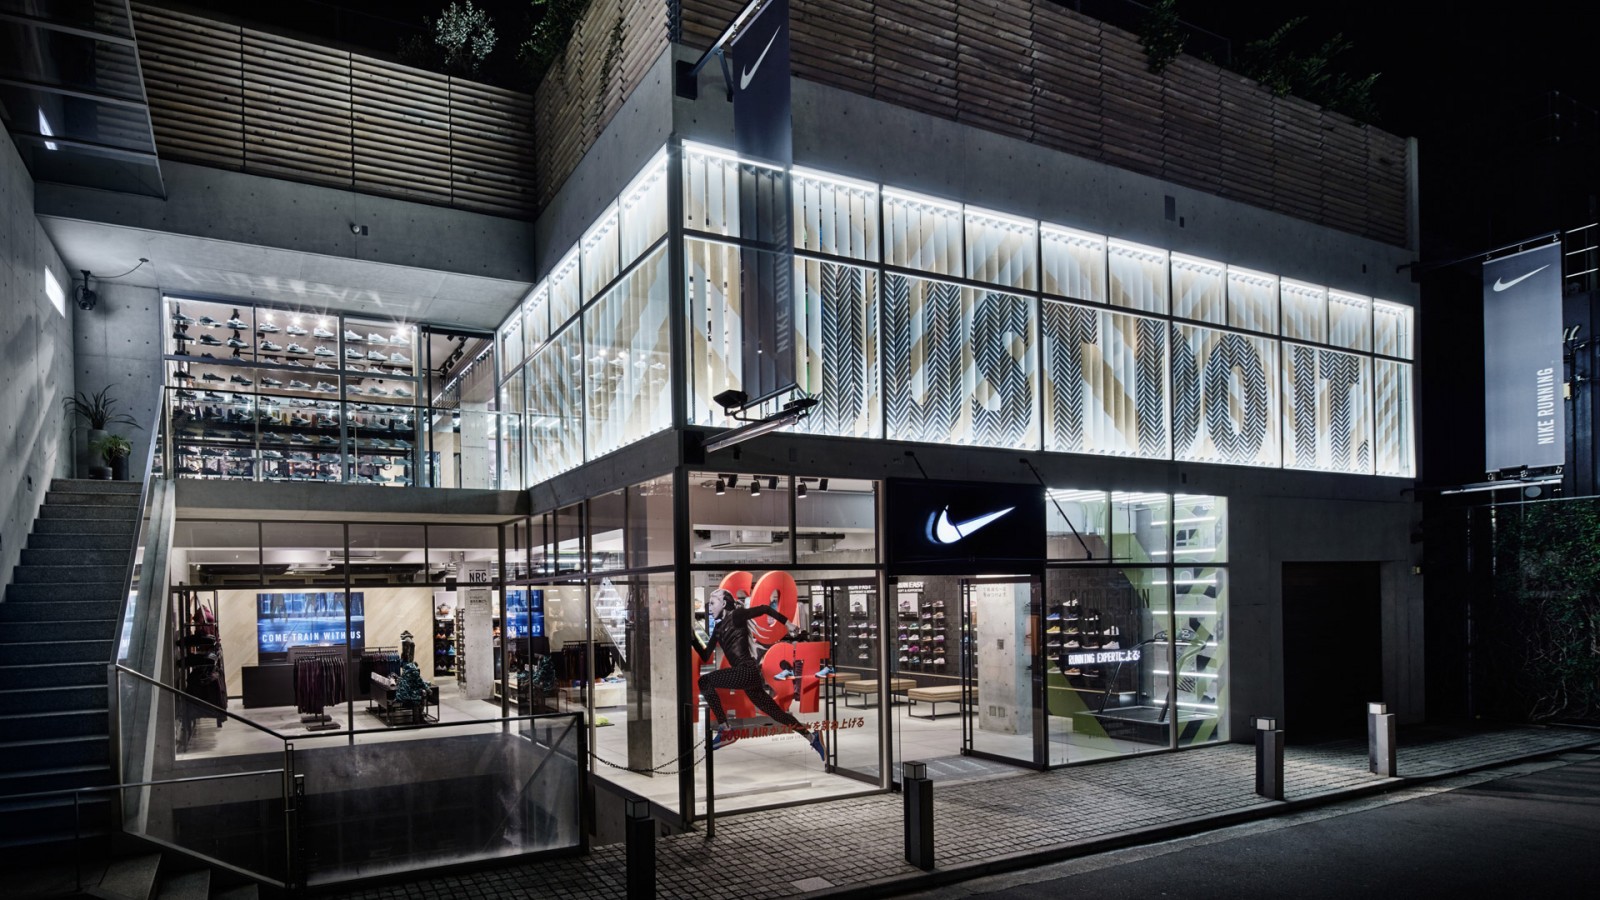 nike-opens-first-running-concept-store-in-tokyo-01-1600x900.jpg